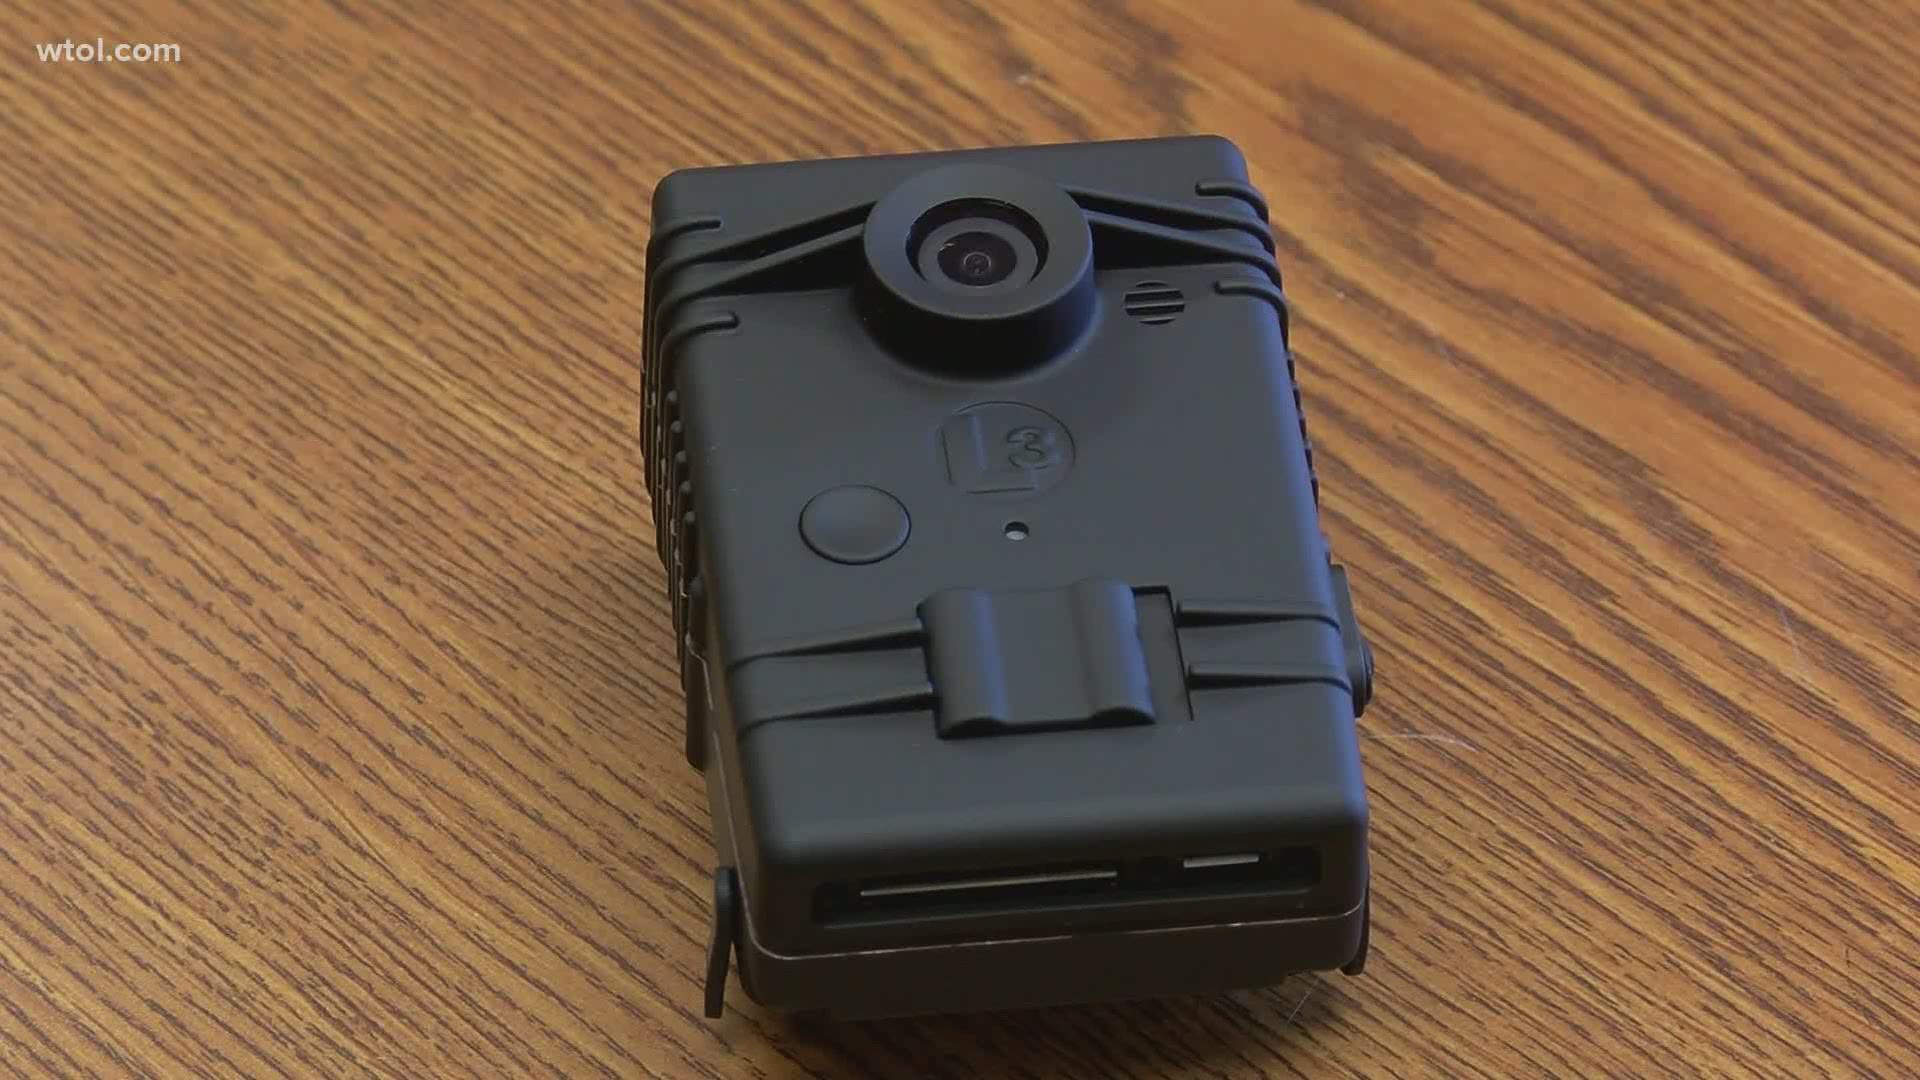 This sets the stage for the department to apply for grants to get additional body cameras.